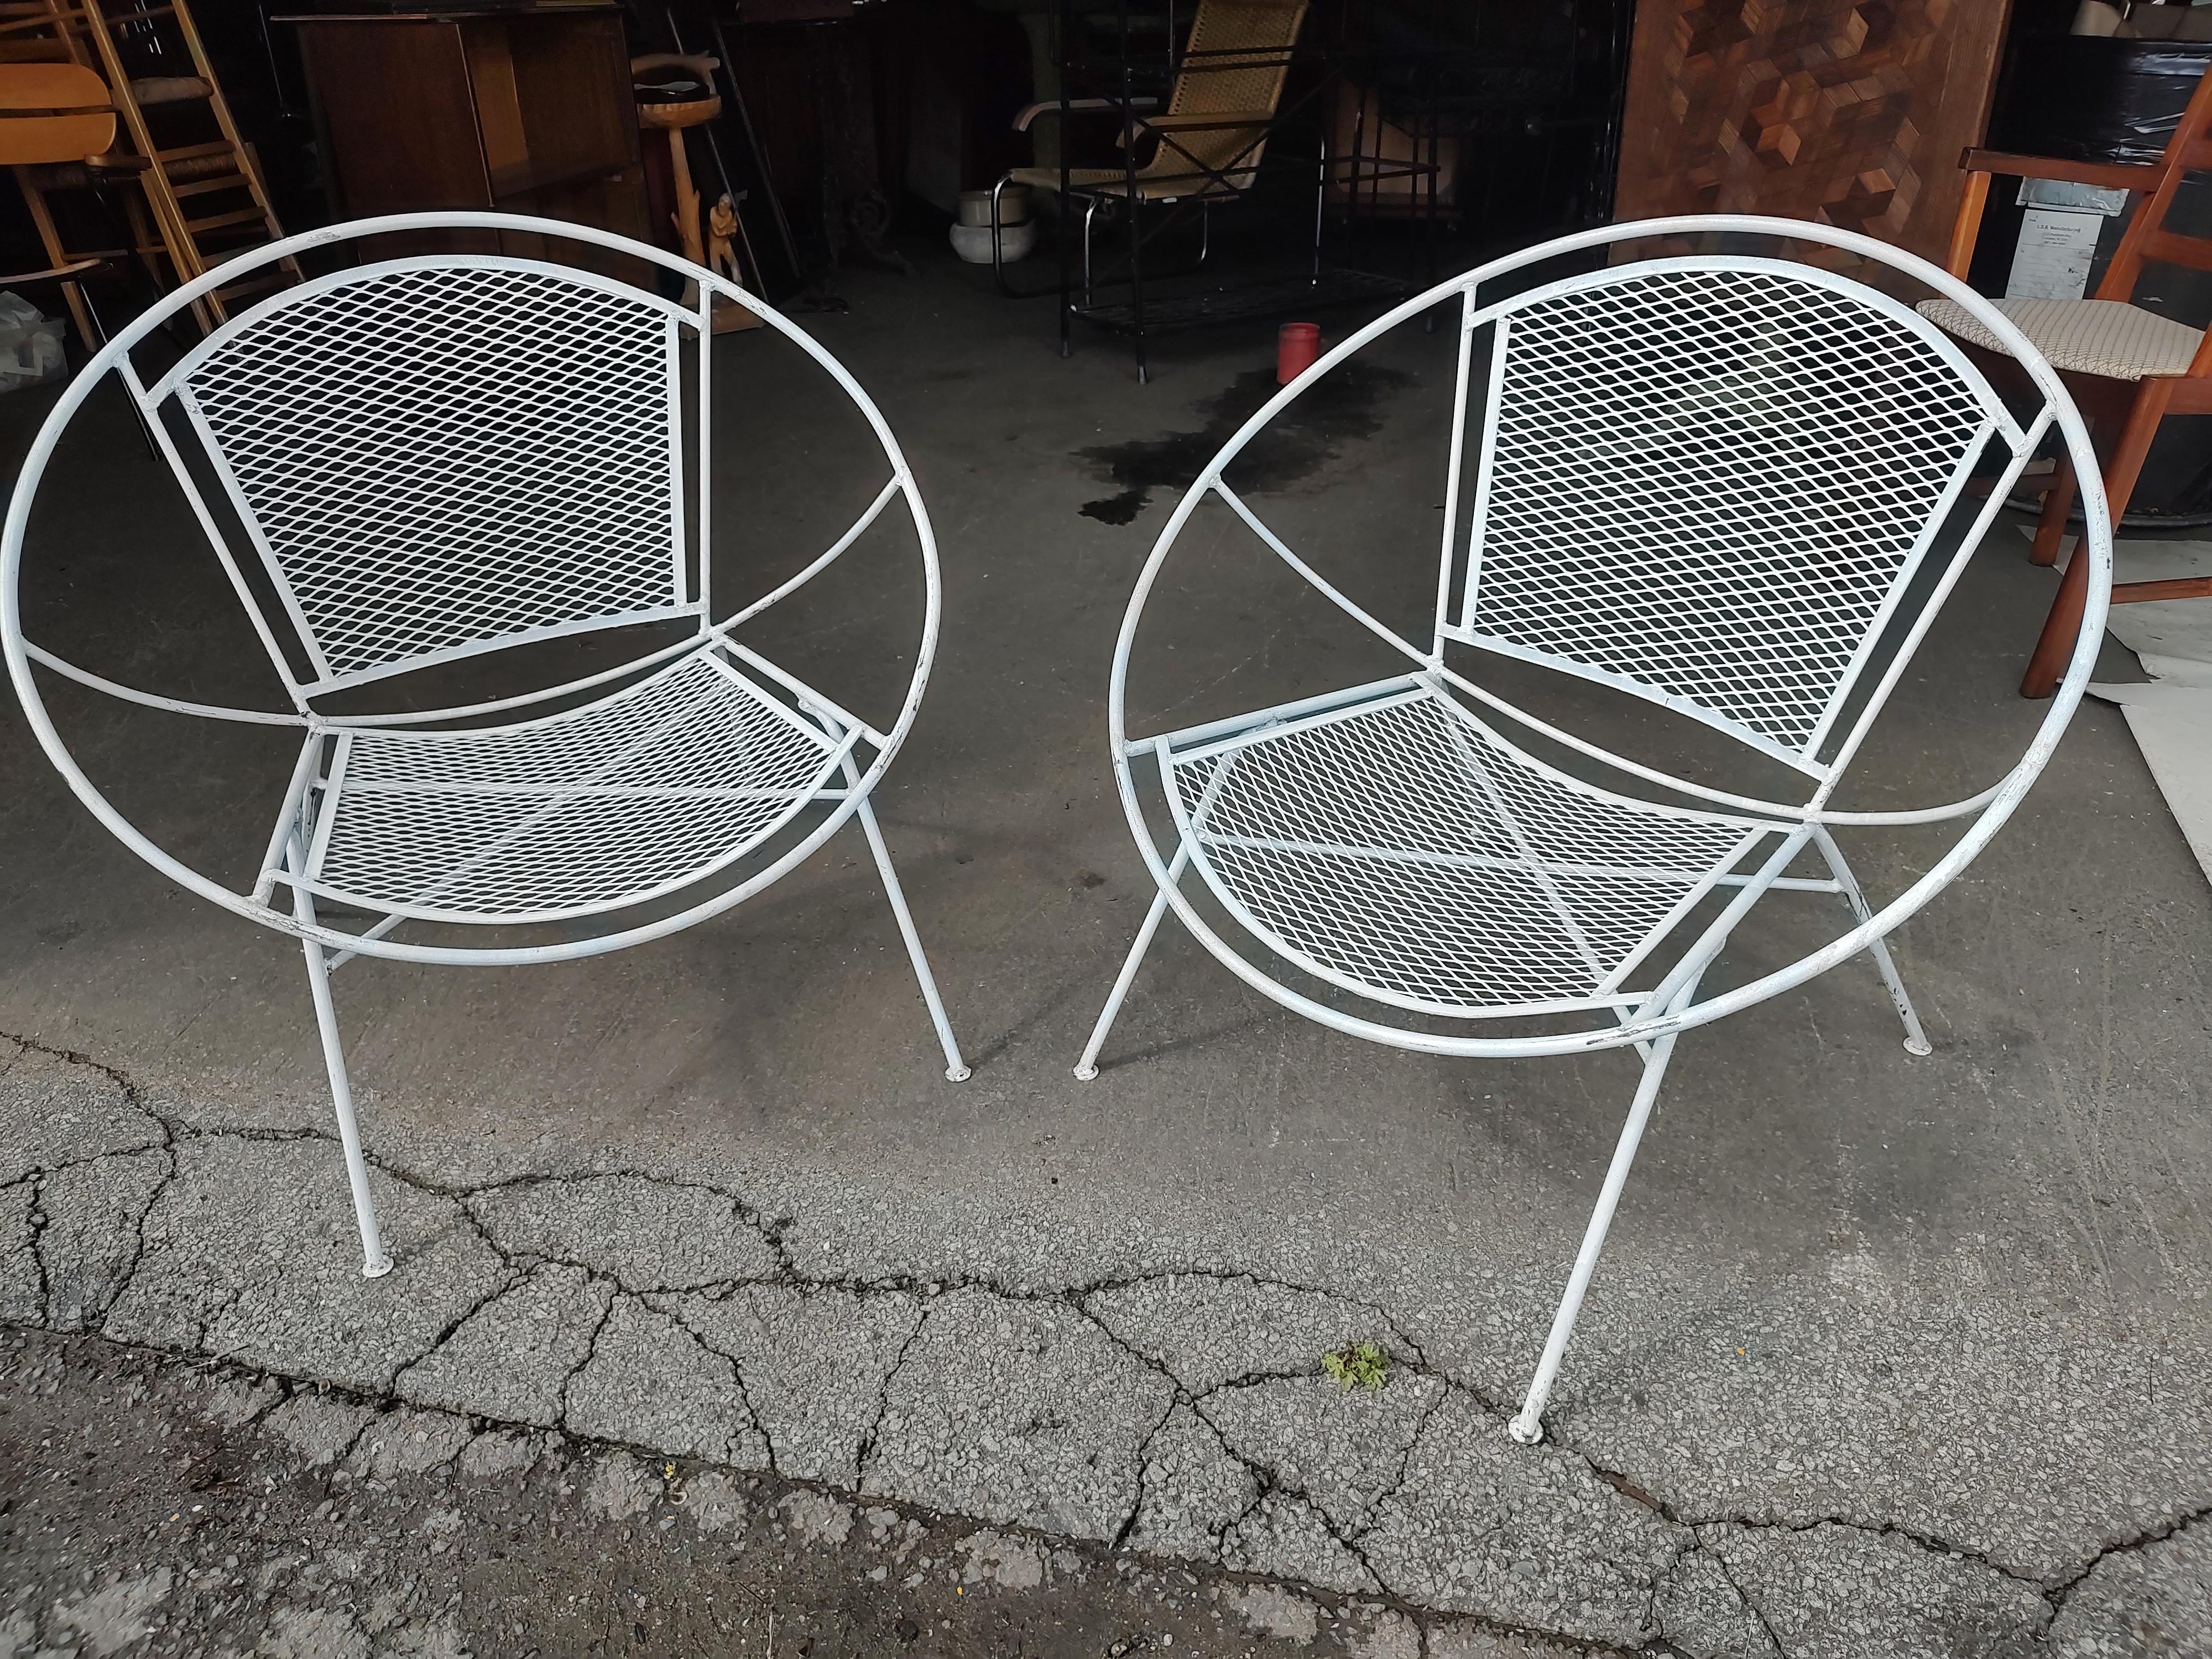 Fantastic pair of Sculptural iron lounge chairs designed by Maurizio Tempestini for John Salterini. circa 1960 hoop radar chairs in old white paint in excellent vintage condition with minimal wear. Sold and priced as a pair. Stylish and comfy.